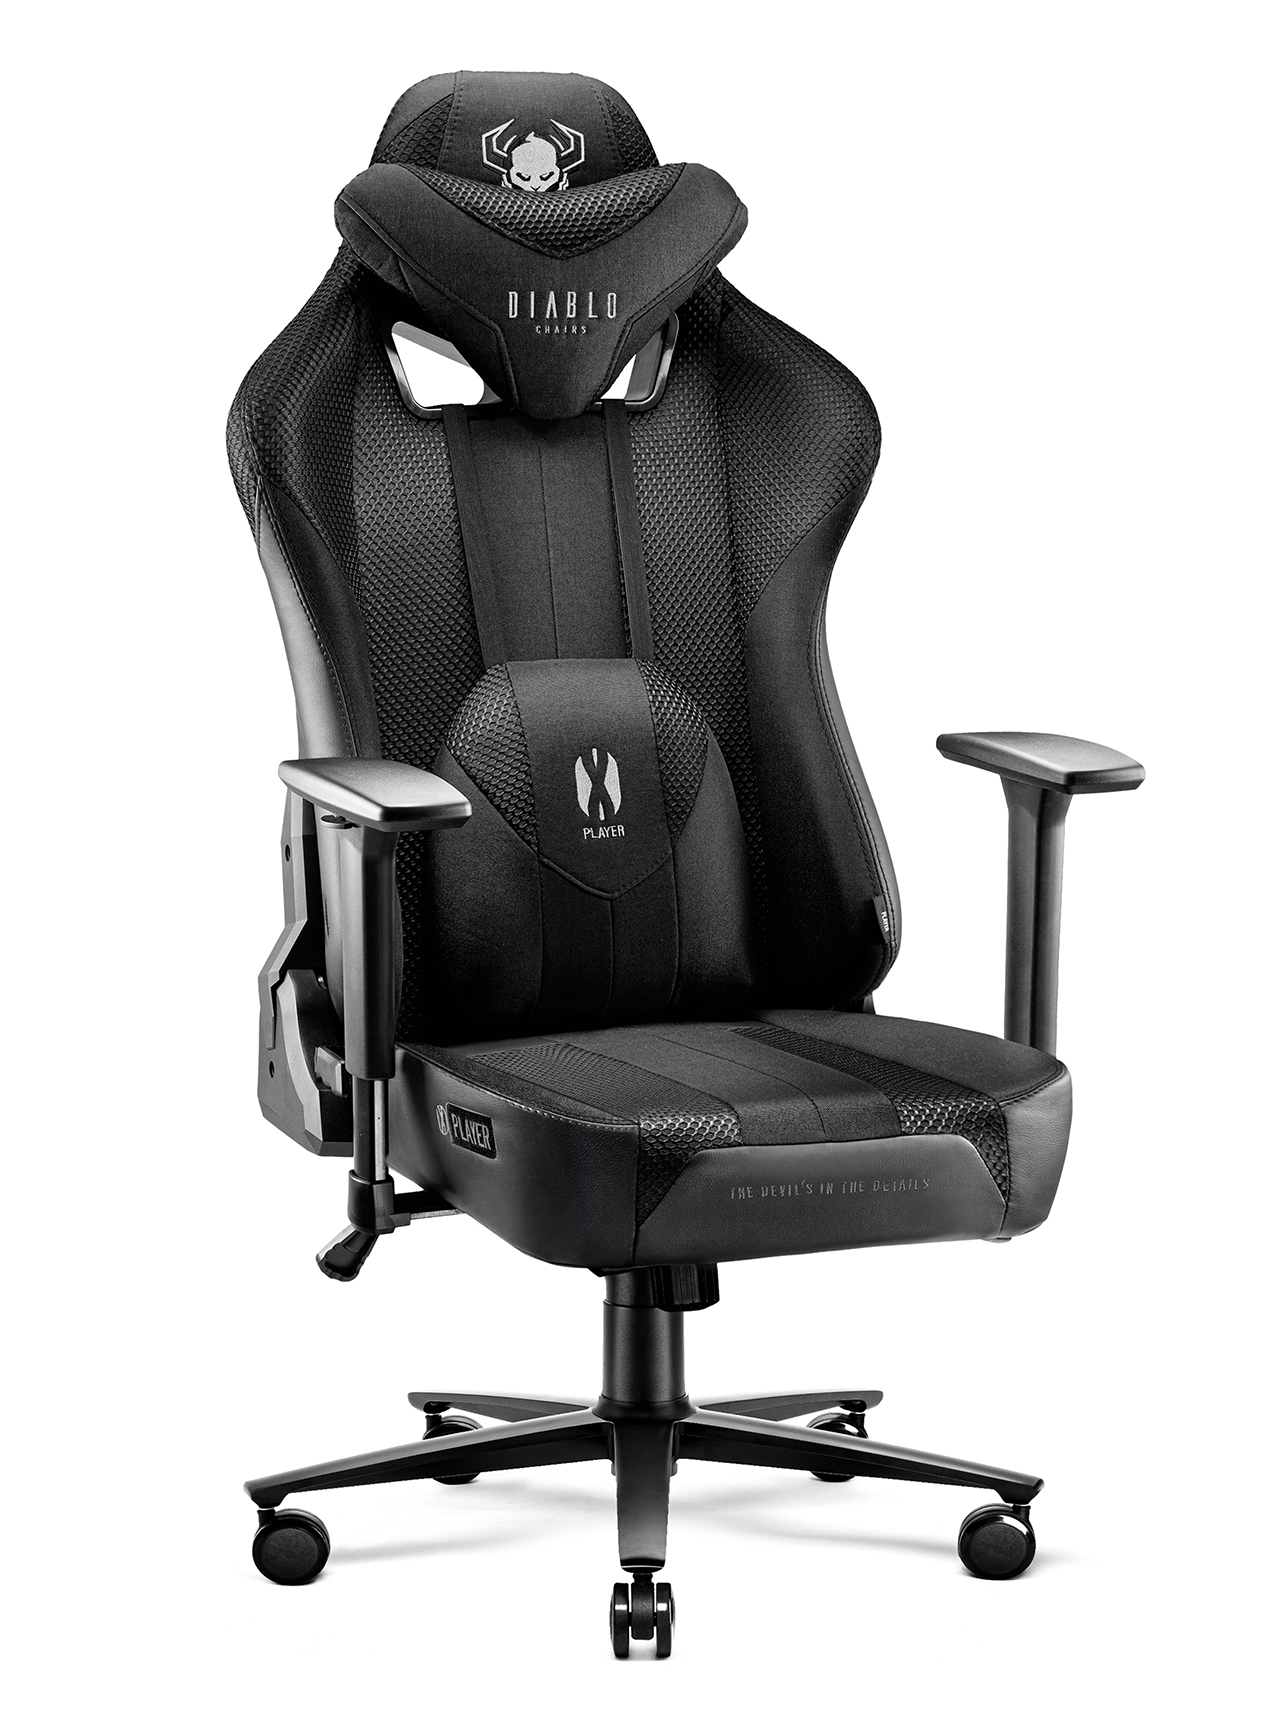 white/black Diablo X-One Gaming Chair Office Desk PC Chair Racing Ergonomic Design Comfortable Armrests Lumbar Head Cushion Leatherette Loadable Up To 150 Kg 